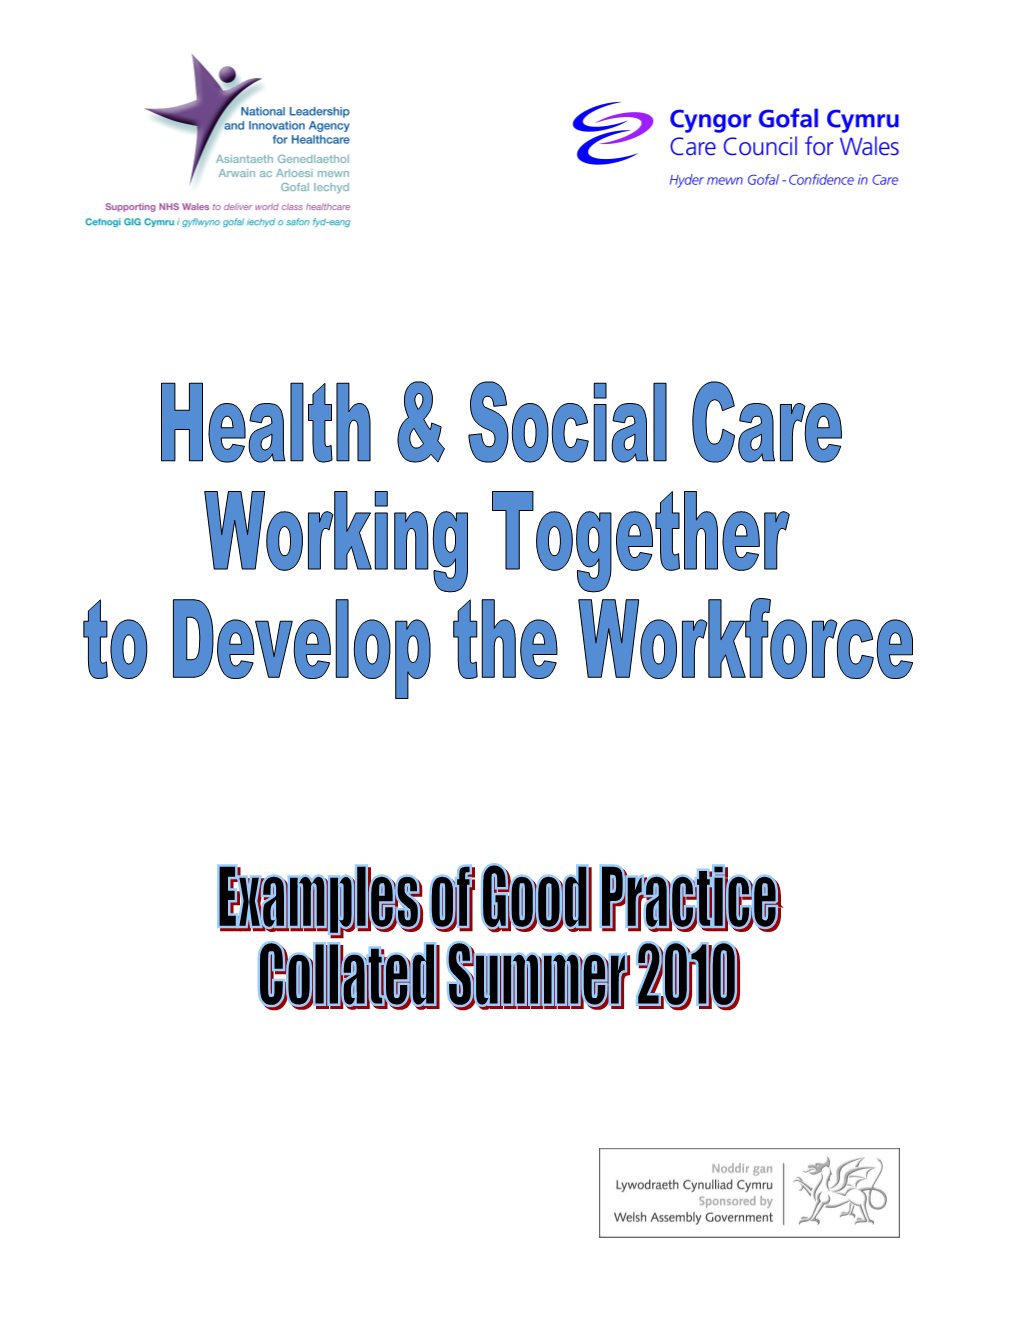 Joint Working Examples Between Health and Social Care